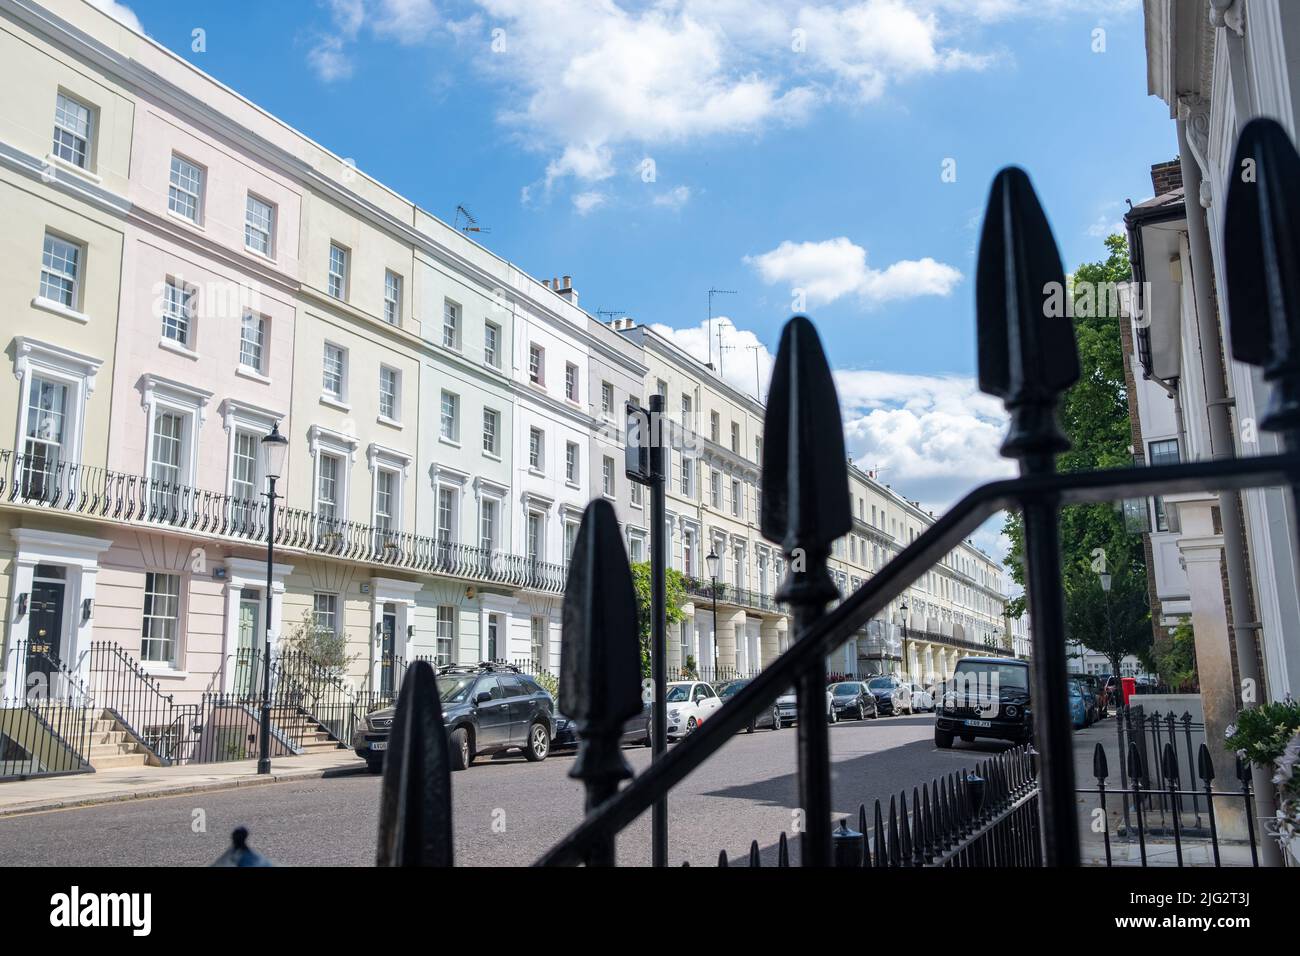 Street of upmarket London townhouses in Notting Hill area of west London Stock Photo